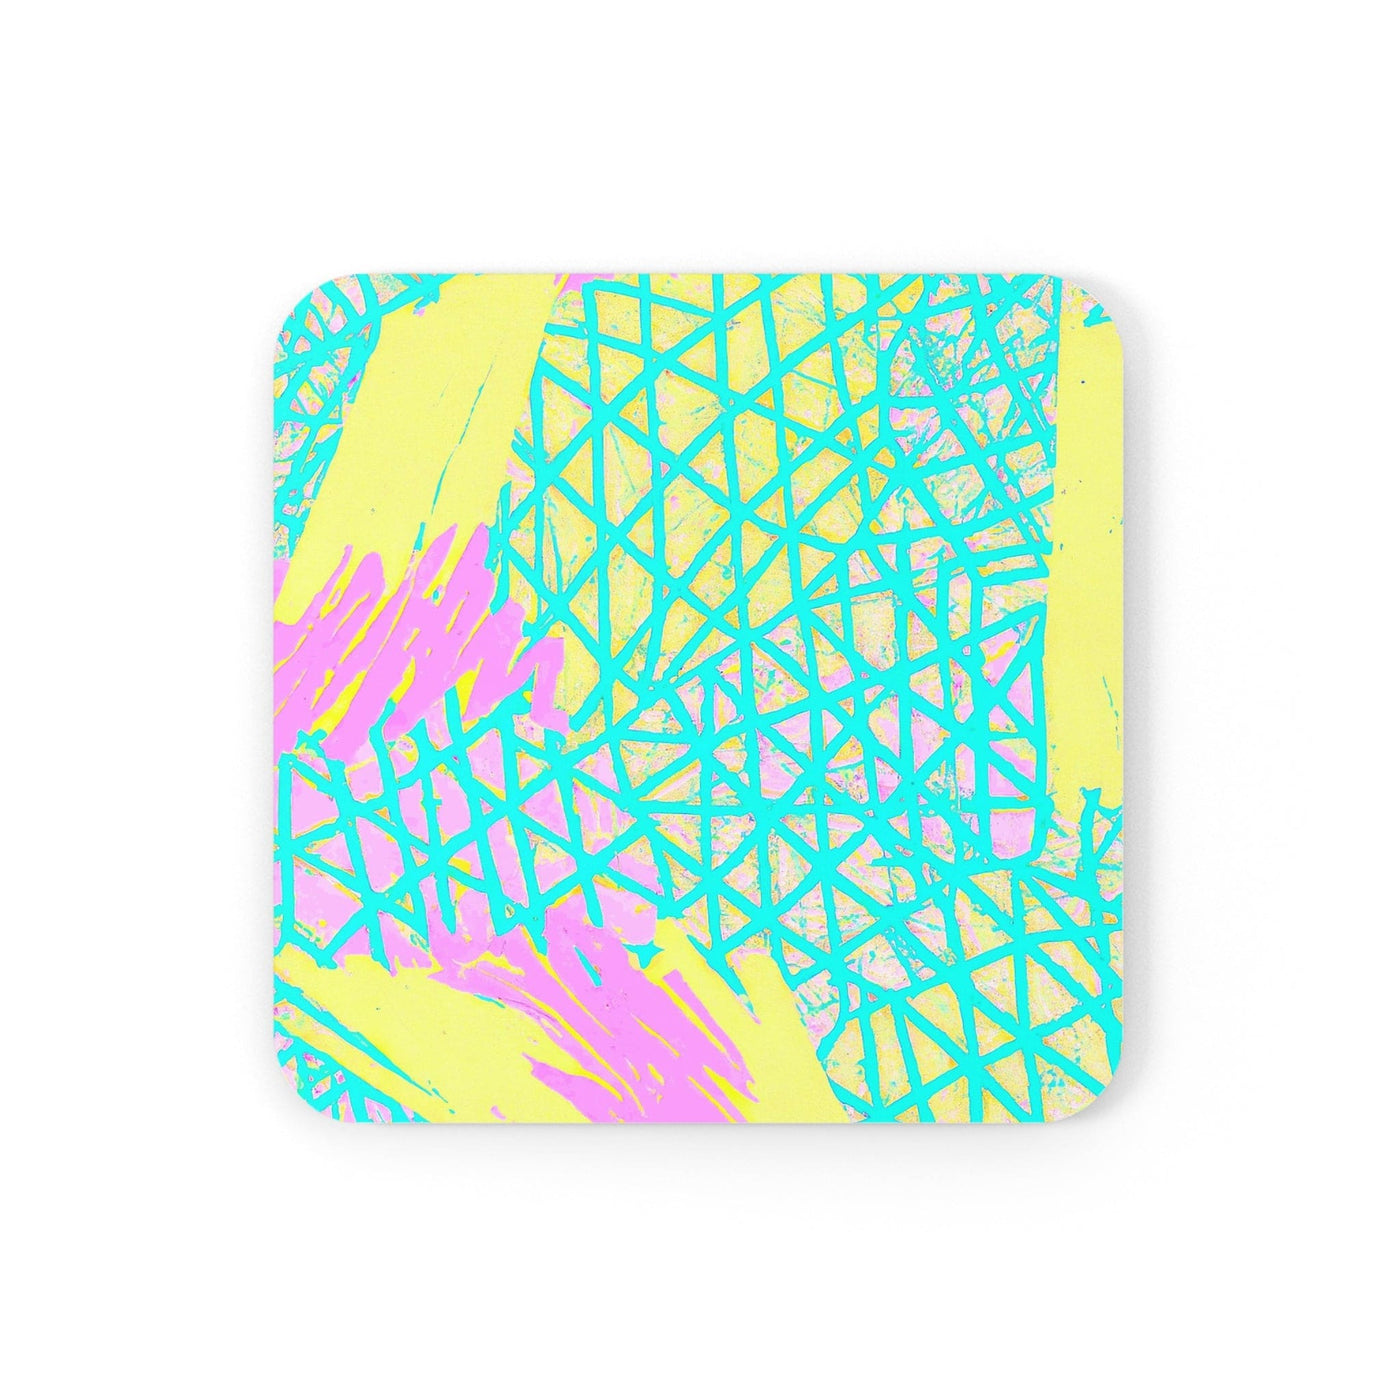 Coaster Set Of 4 For Drinks Cyan Blue Lime Green And Pink Pattern - Decorative